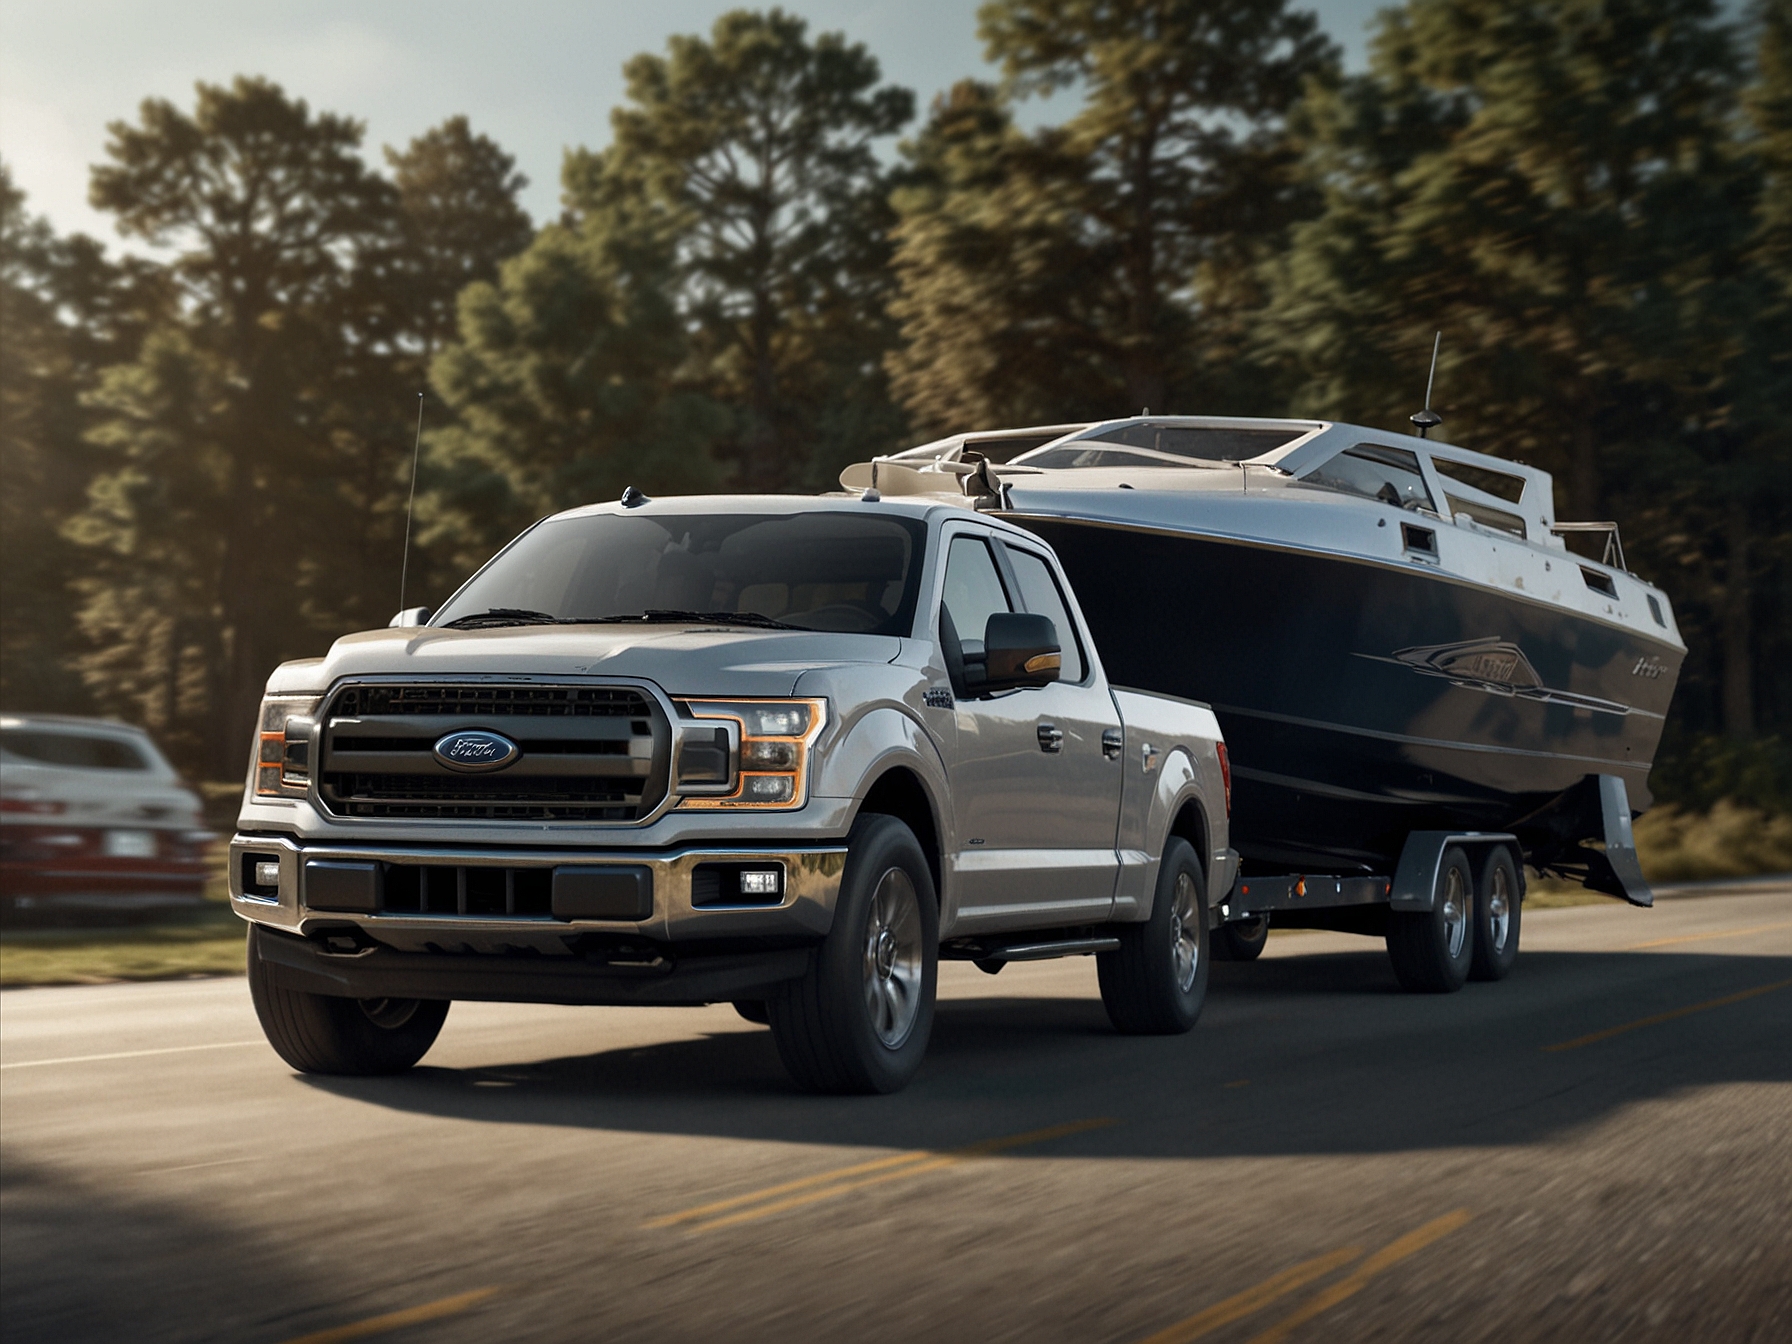 A Ford F-150 towing a large boat on a trailer, showcasing its robust towing capabilities and advanced features like Pro Trailer Backup Assist and onboard scales.